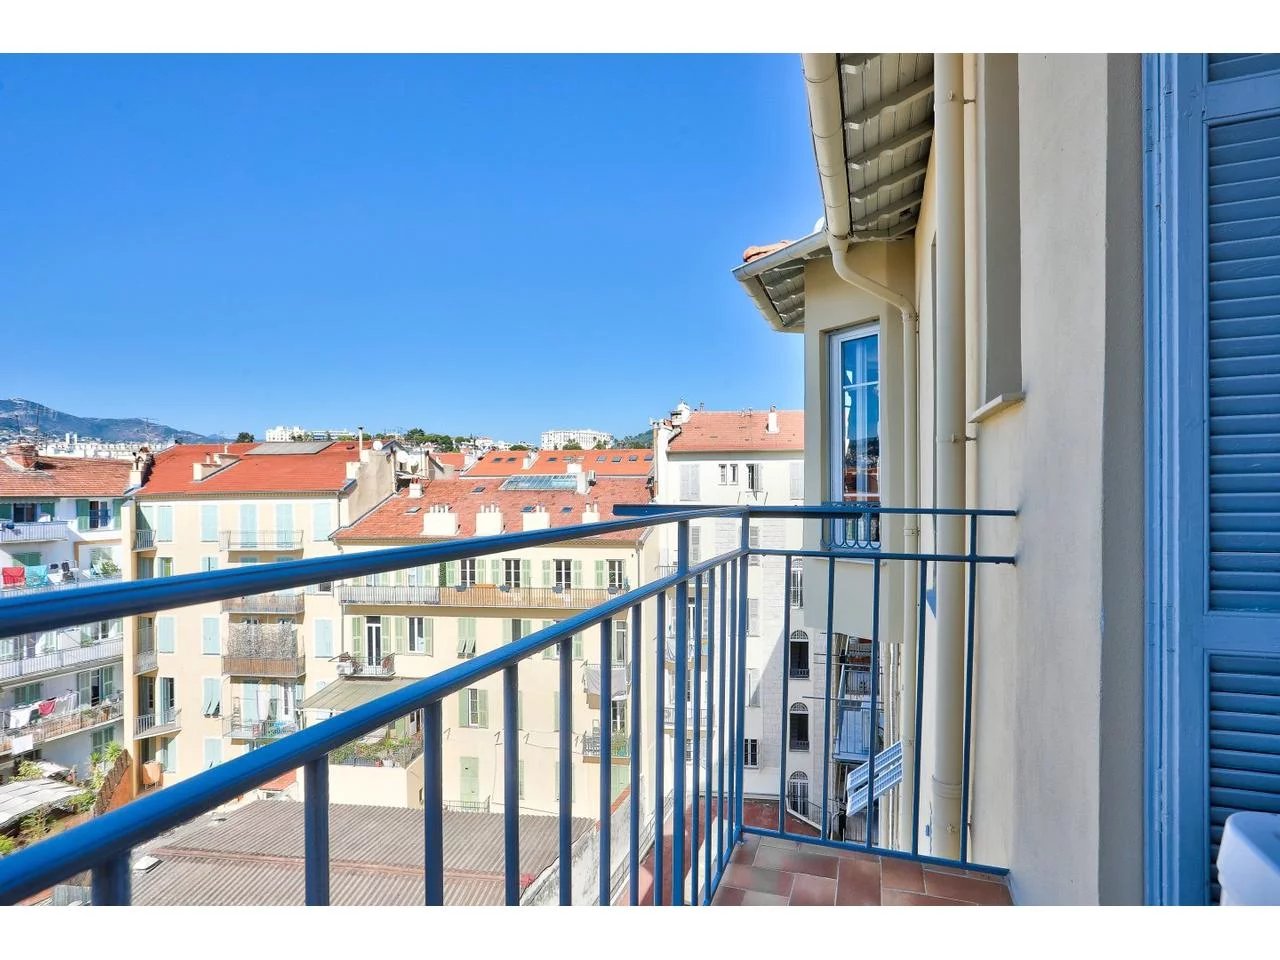 Appartement  3 Rooms 97.81m2  for sale   820 000 €